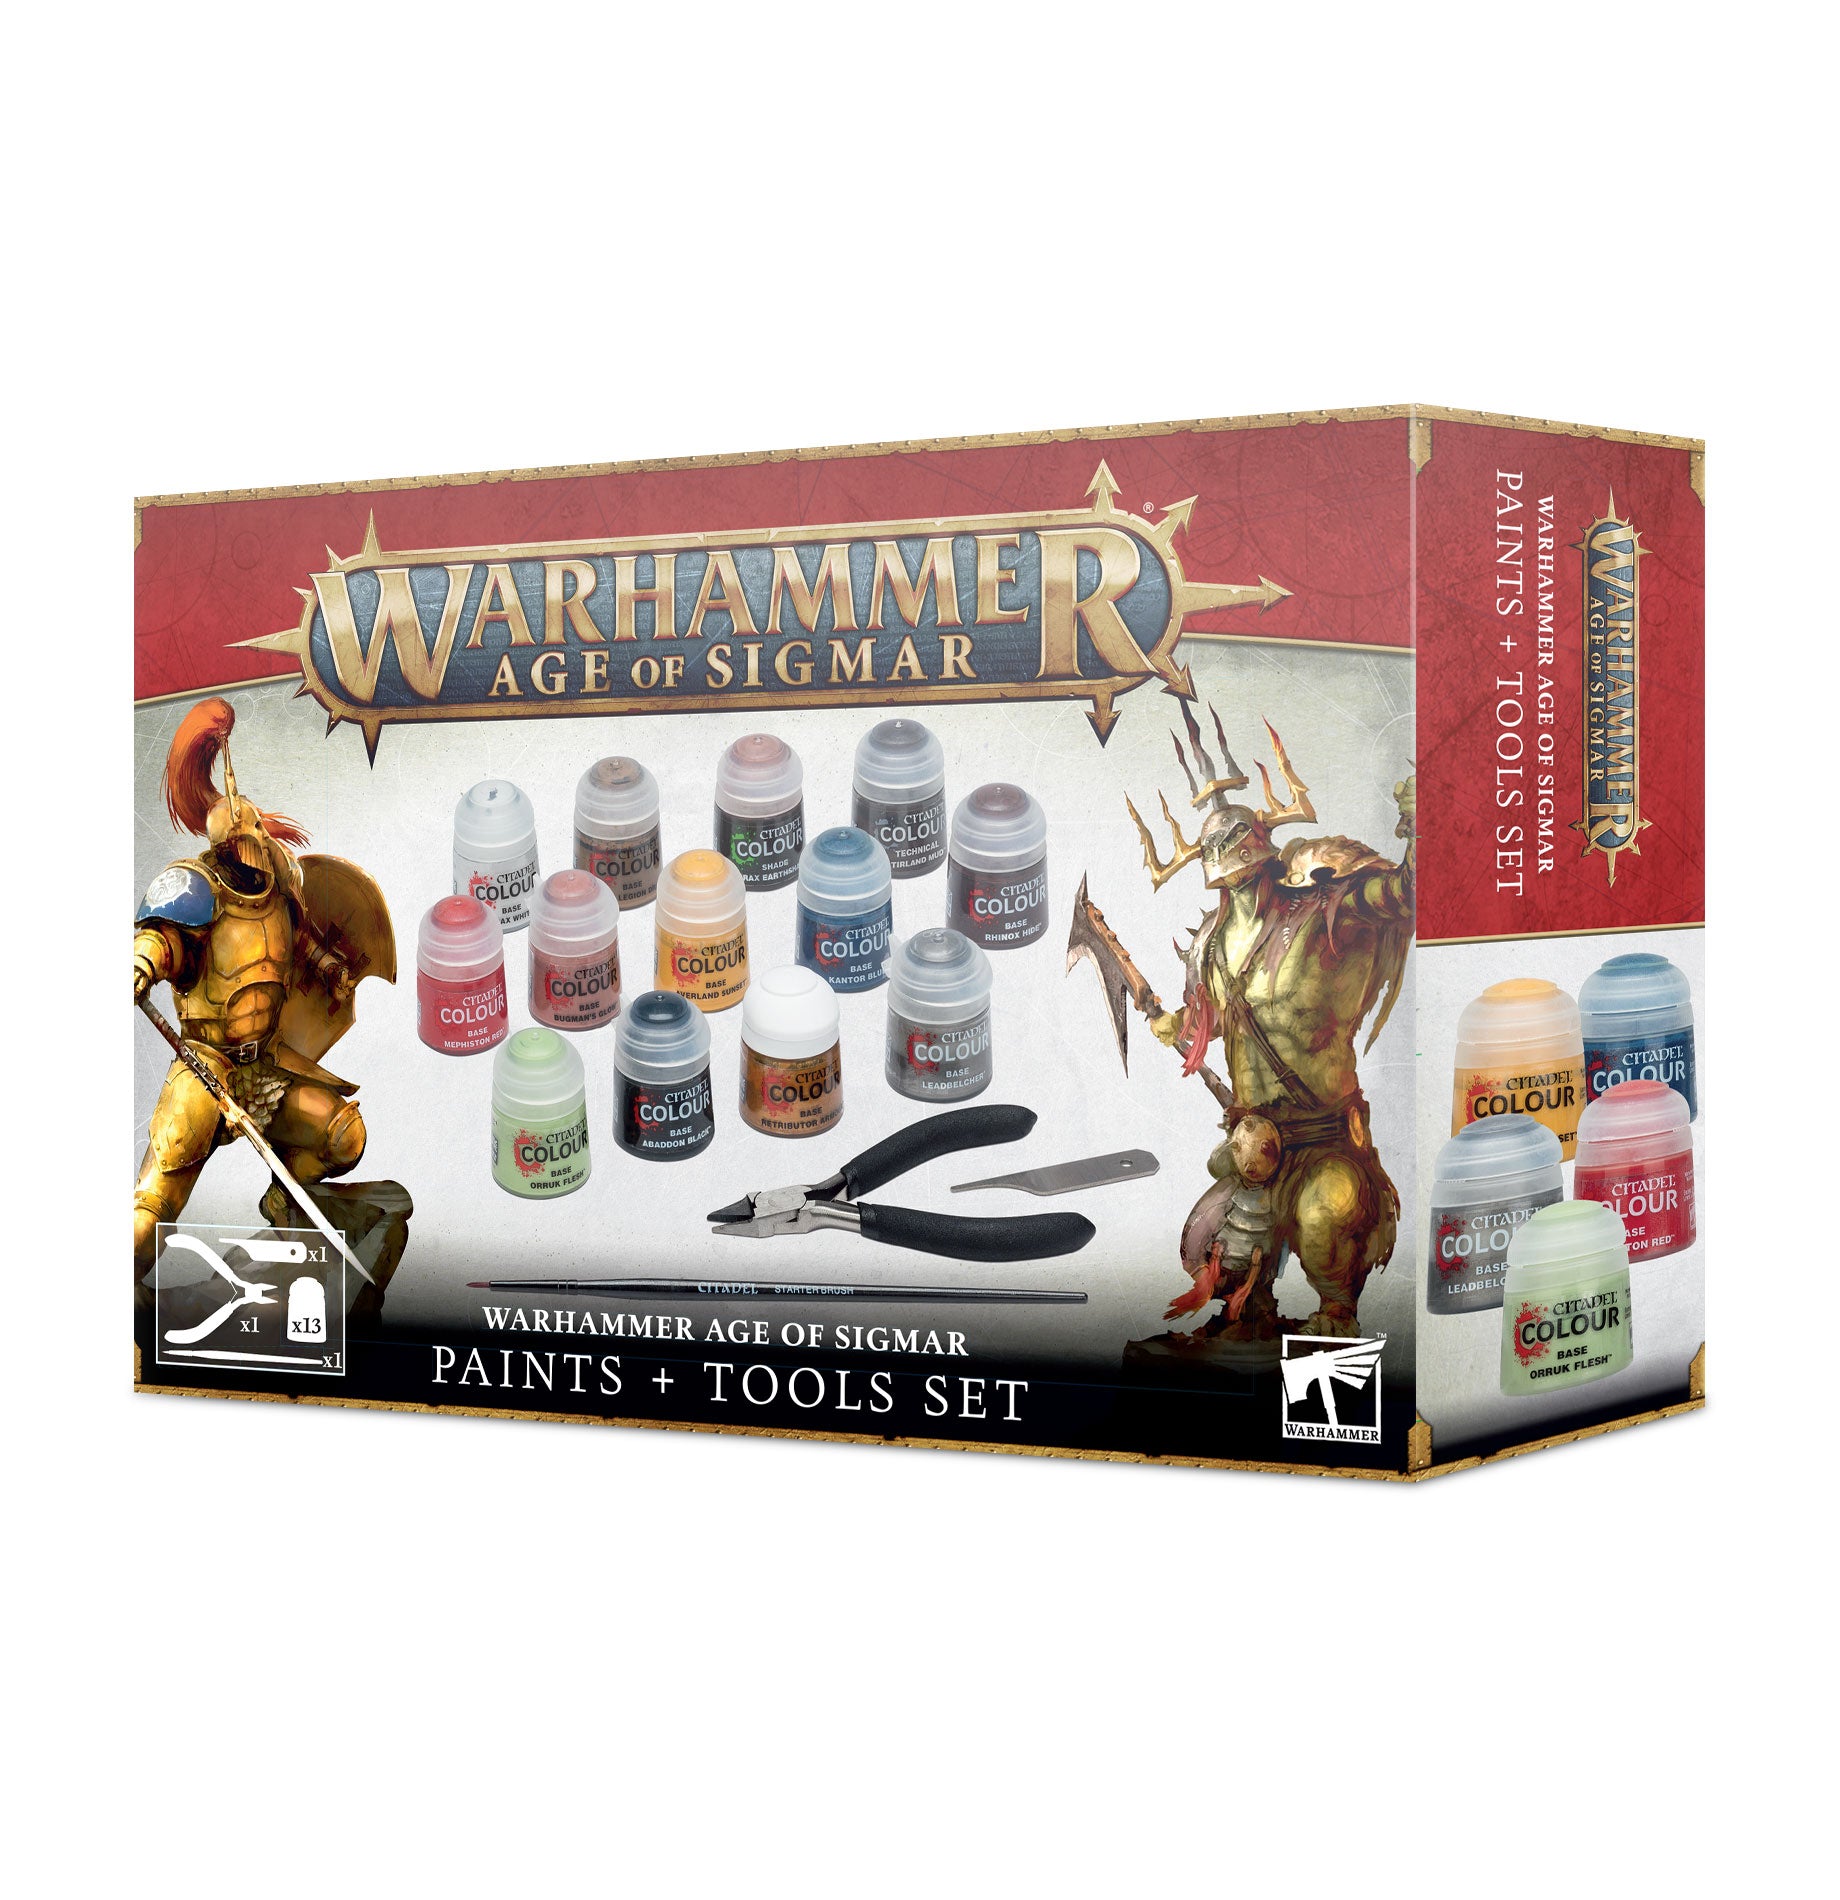 Warhammer Age of Sigmar: Paints + Tools Set - Bards & Cards